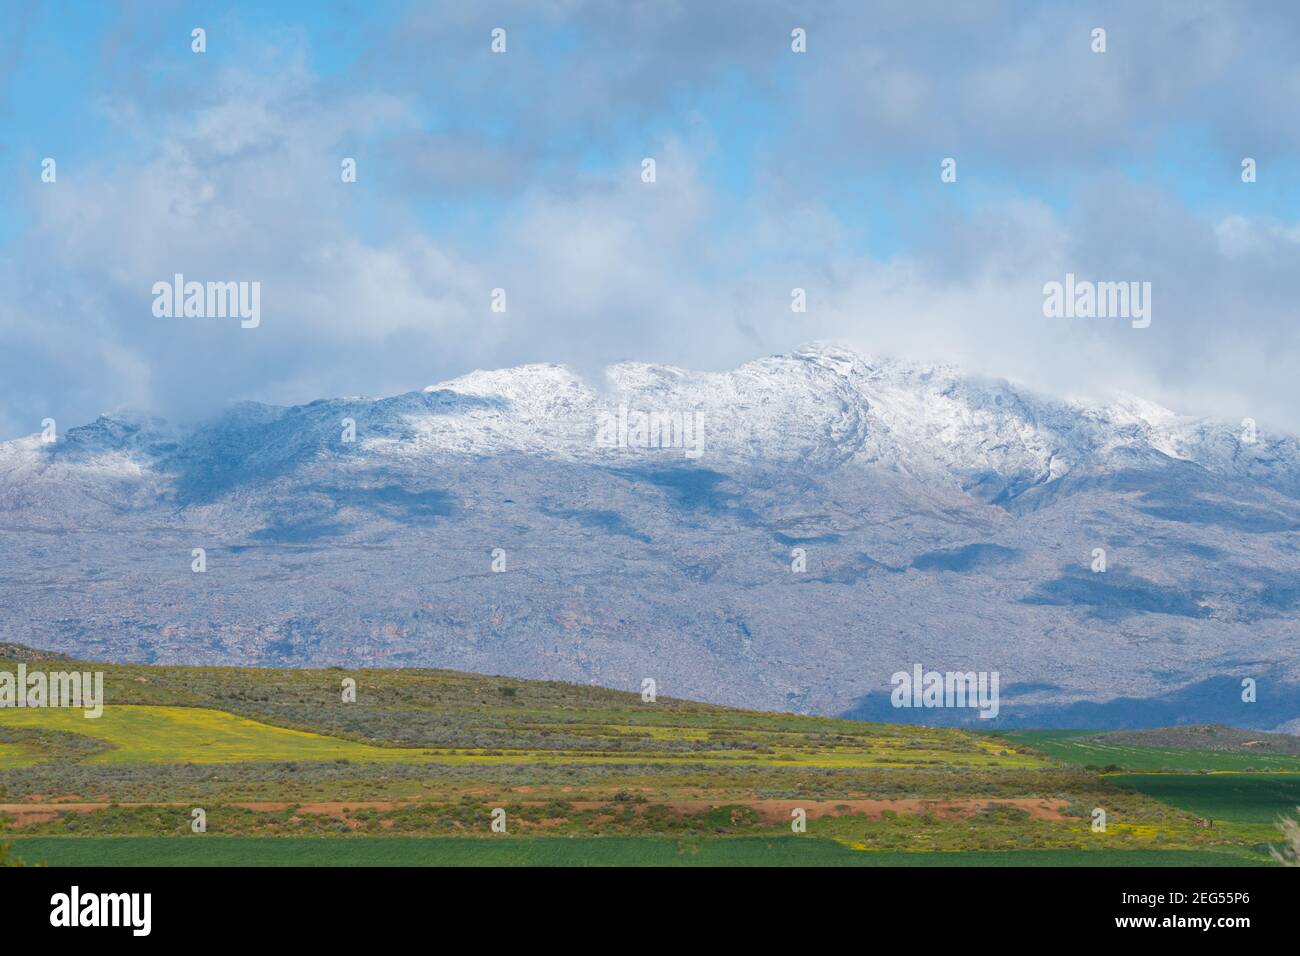 Winter landscape view of snow capped mountains and farmland in the agricultural region of Ceres, Western Cape, South Africa Stock Photo